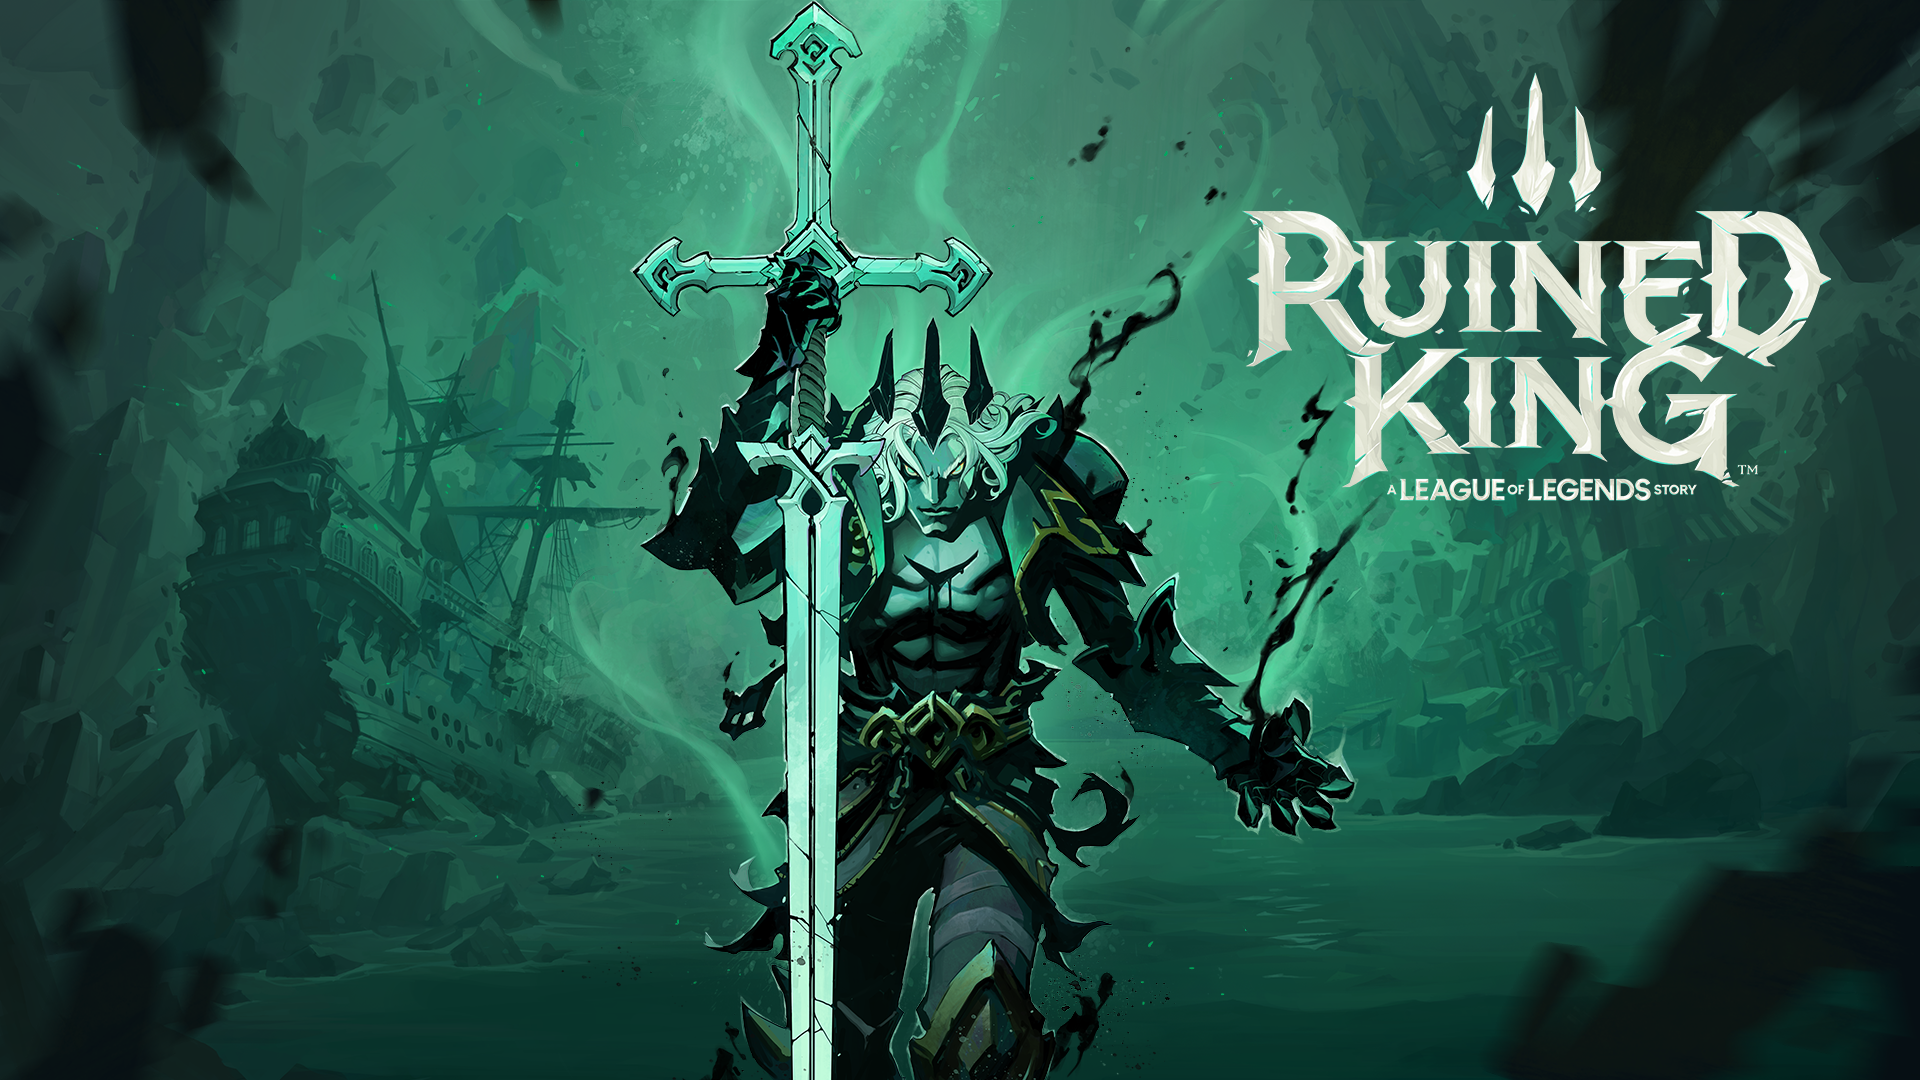 Ruined King: A League of Legends Story Is A Single-Player, RPG Game Made By Riot - Launch In Early 2021 1